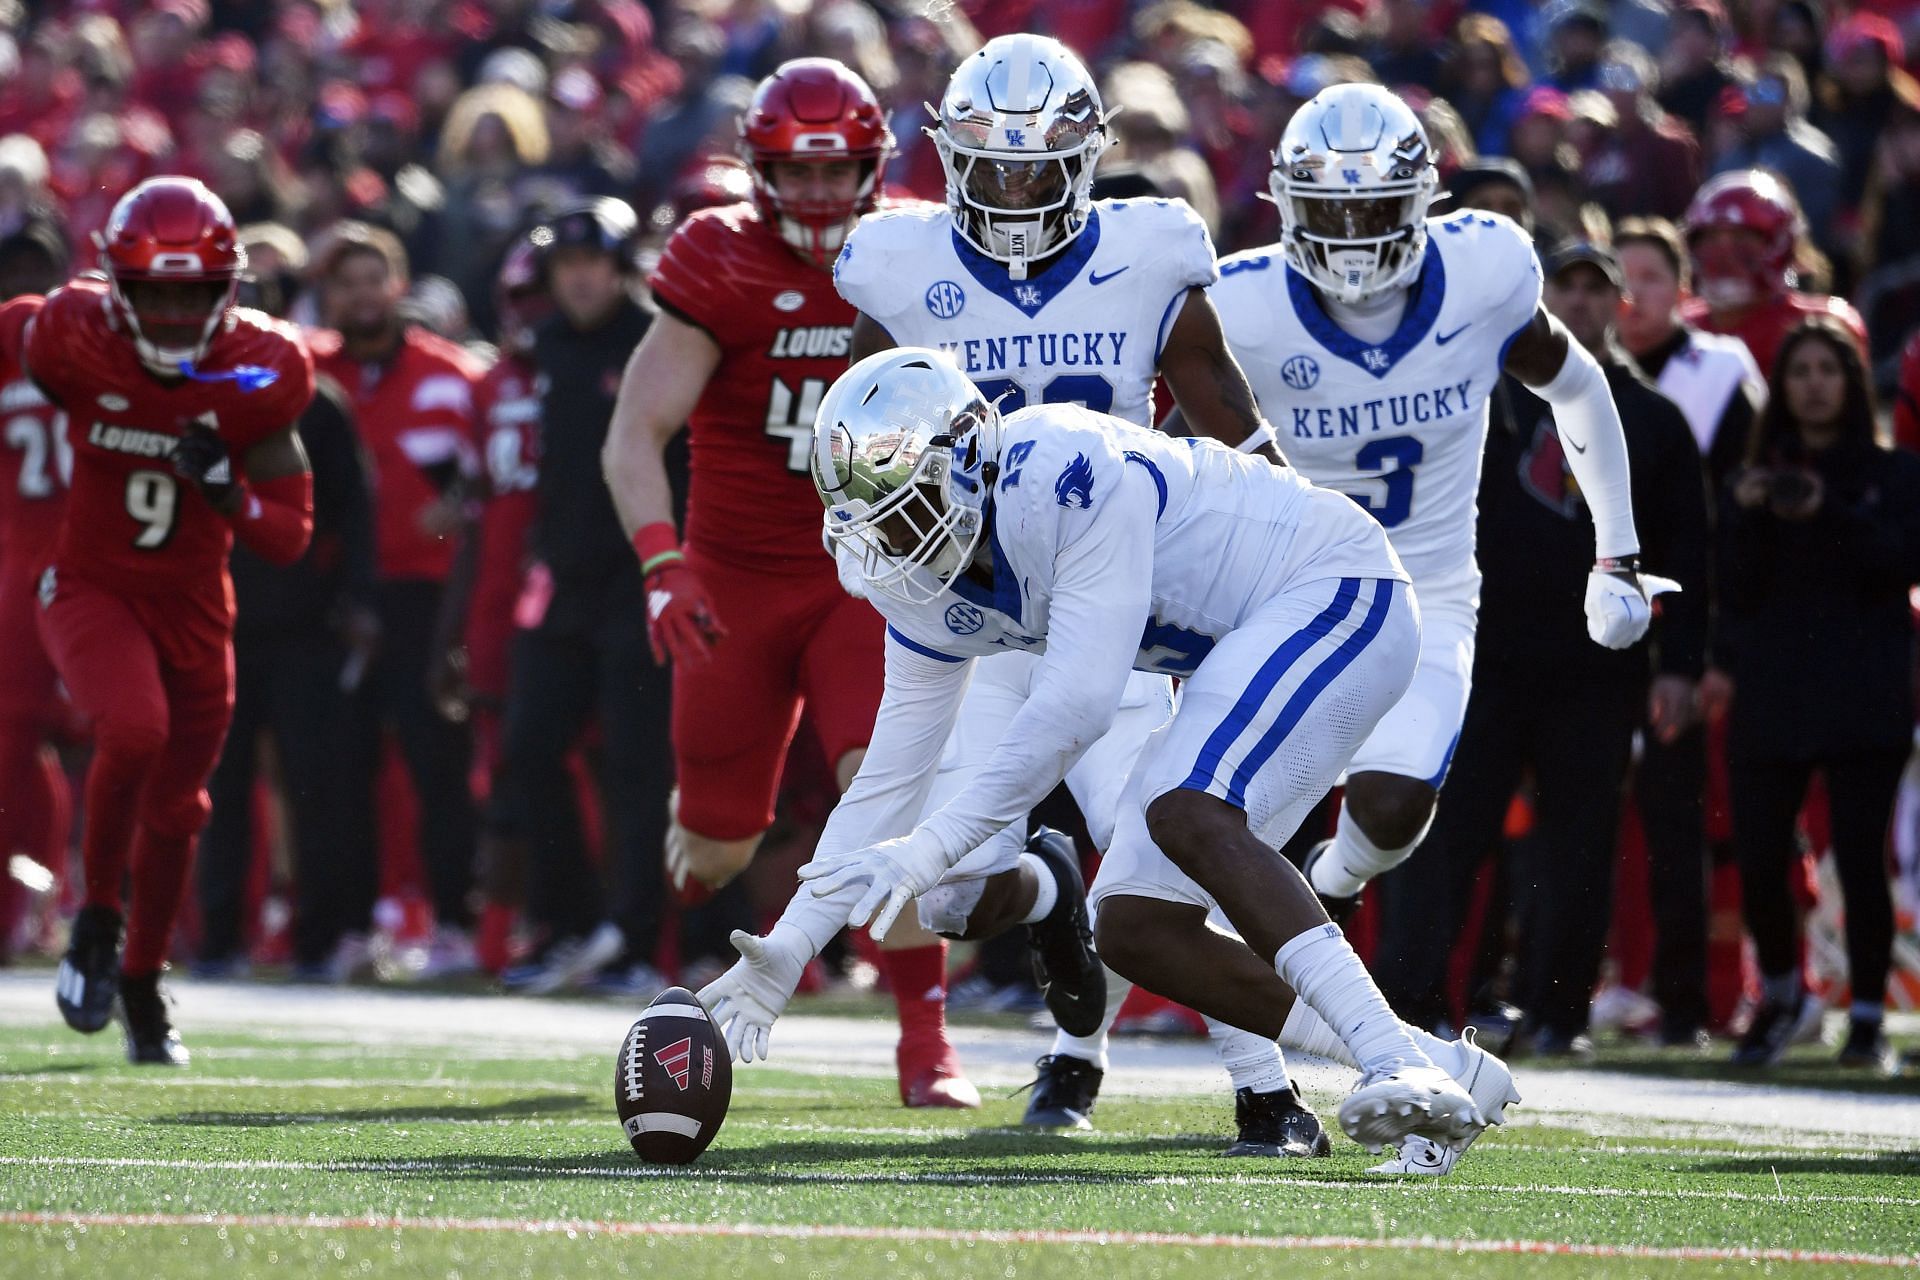 Kentucky linebacker J.J. Weaver recovers a fumble during the second half against Louisville in Louisville, Ky. on Nov. 25. Kentucky won 38-31. (AP Photo/Timothy D. Easley)